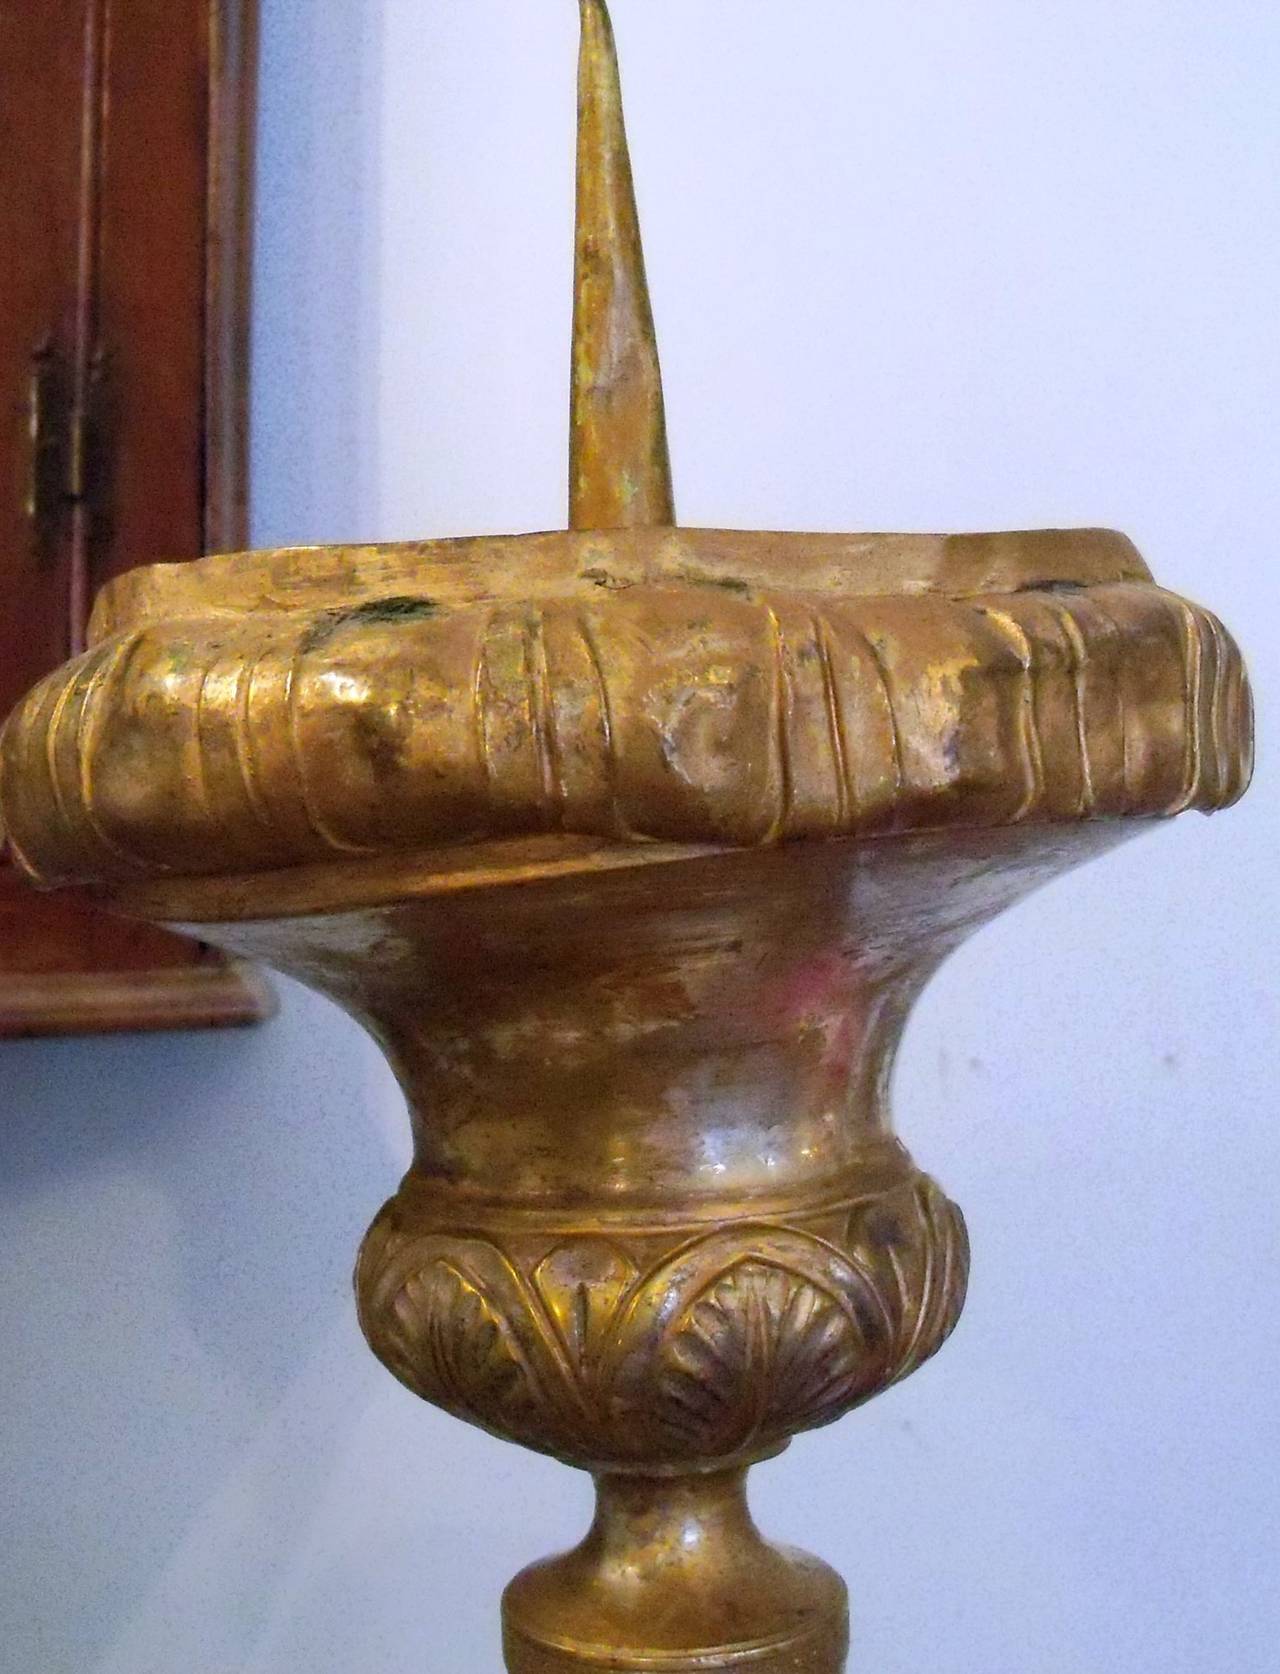 Two similar but not identical French church candlesticks. The one pictured on the left is silvered brass and heavily ornamented with neoclassical features including drapery, Greek keys and palmettes and with religious symbols including a lamb,